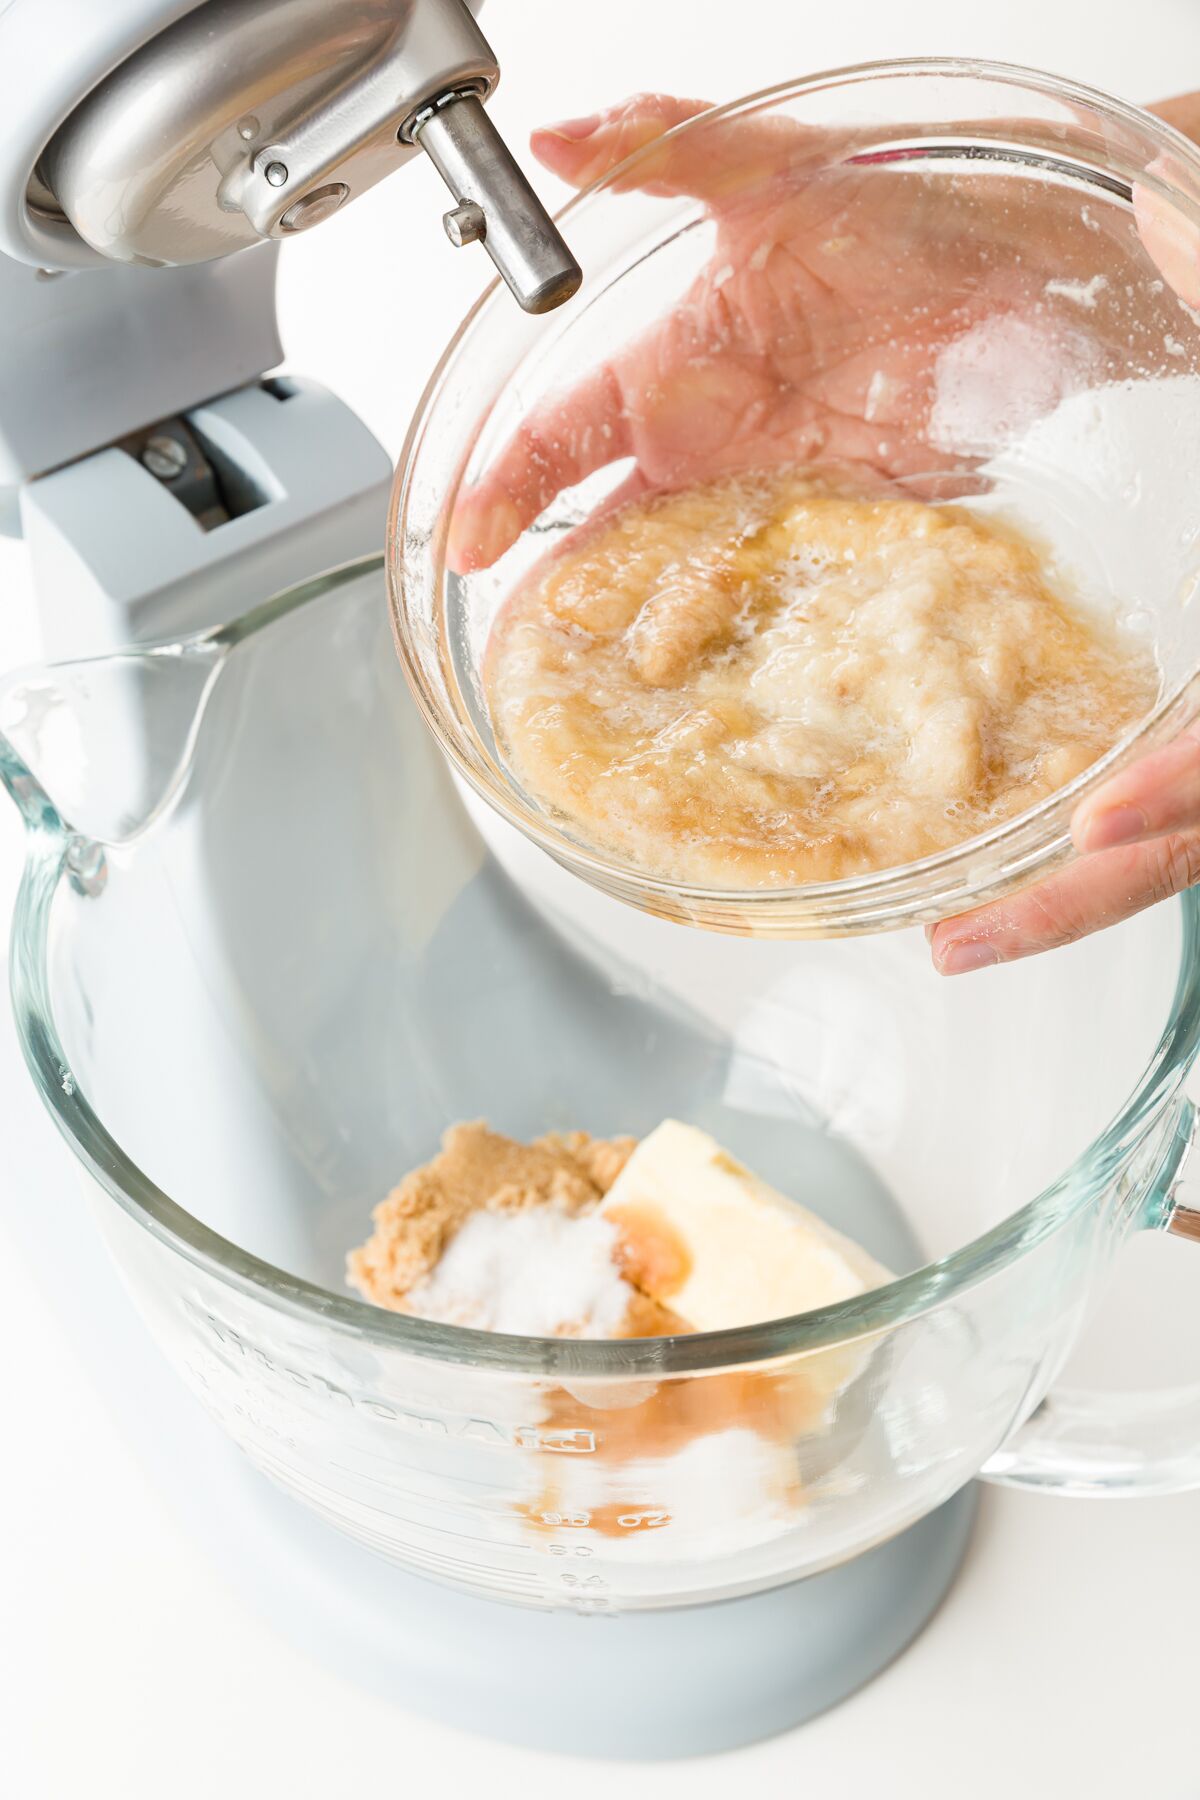 Pouring a bowl of mashed bananas into a stand mixer